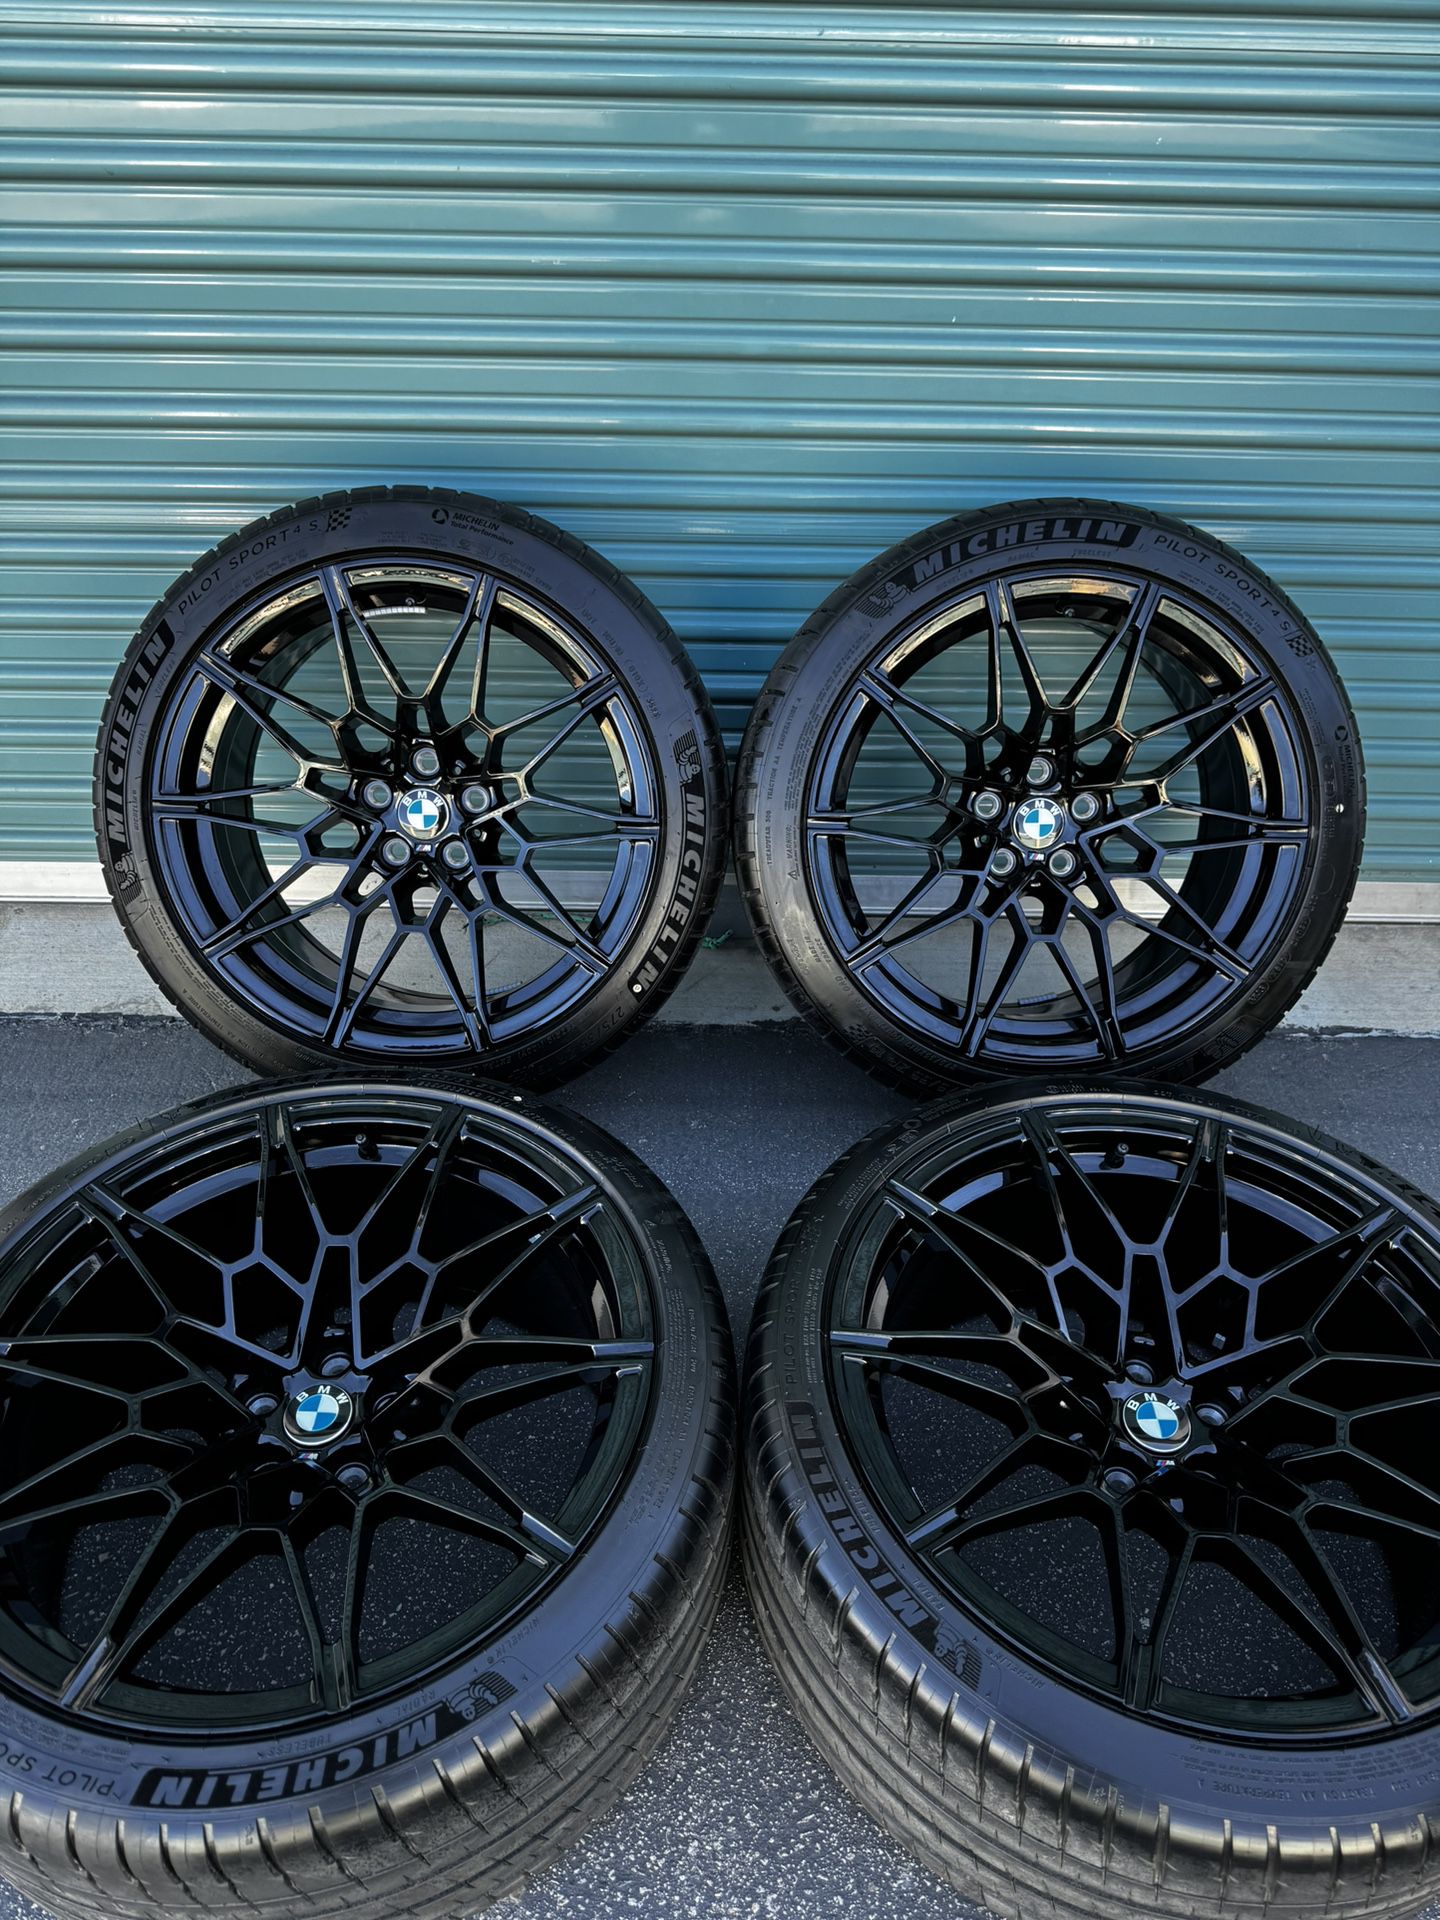 Bmw M3 M4 Competition Factory Wheels Tires